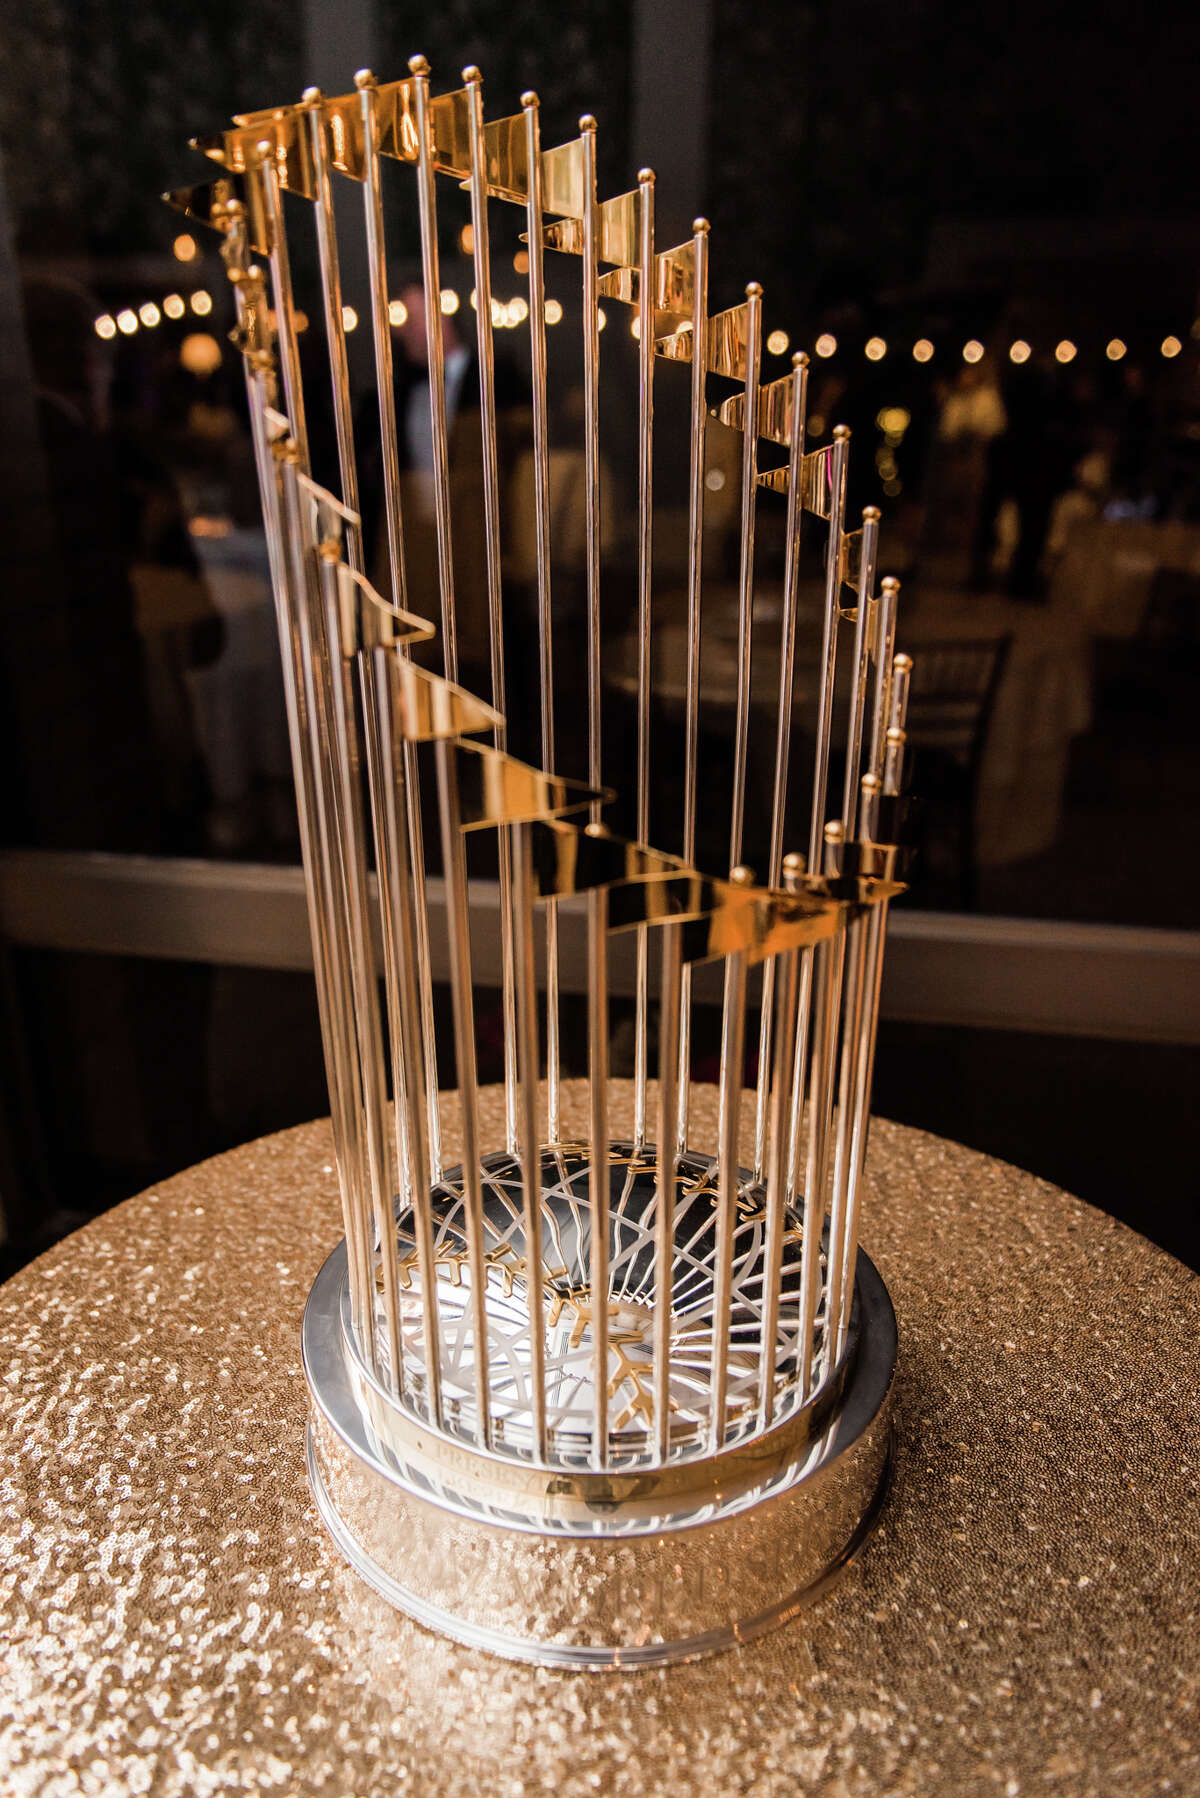 Want to see the World Series trophy? Whom do you know?